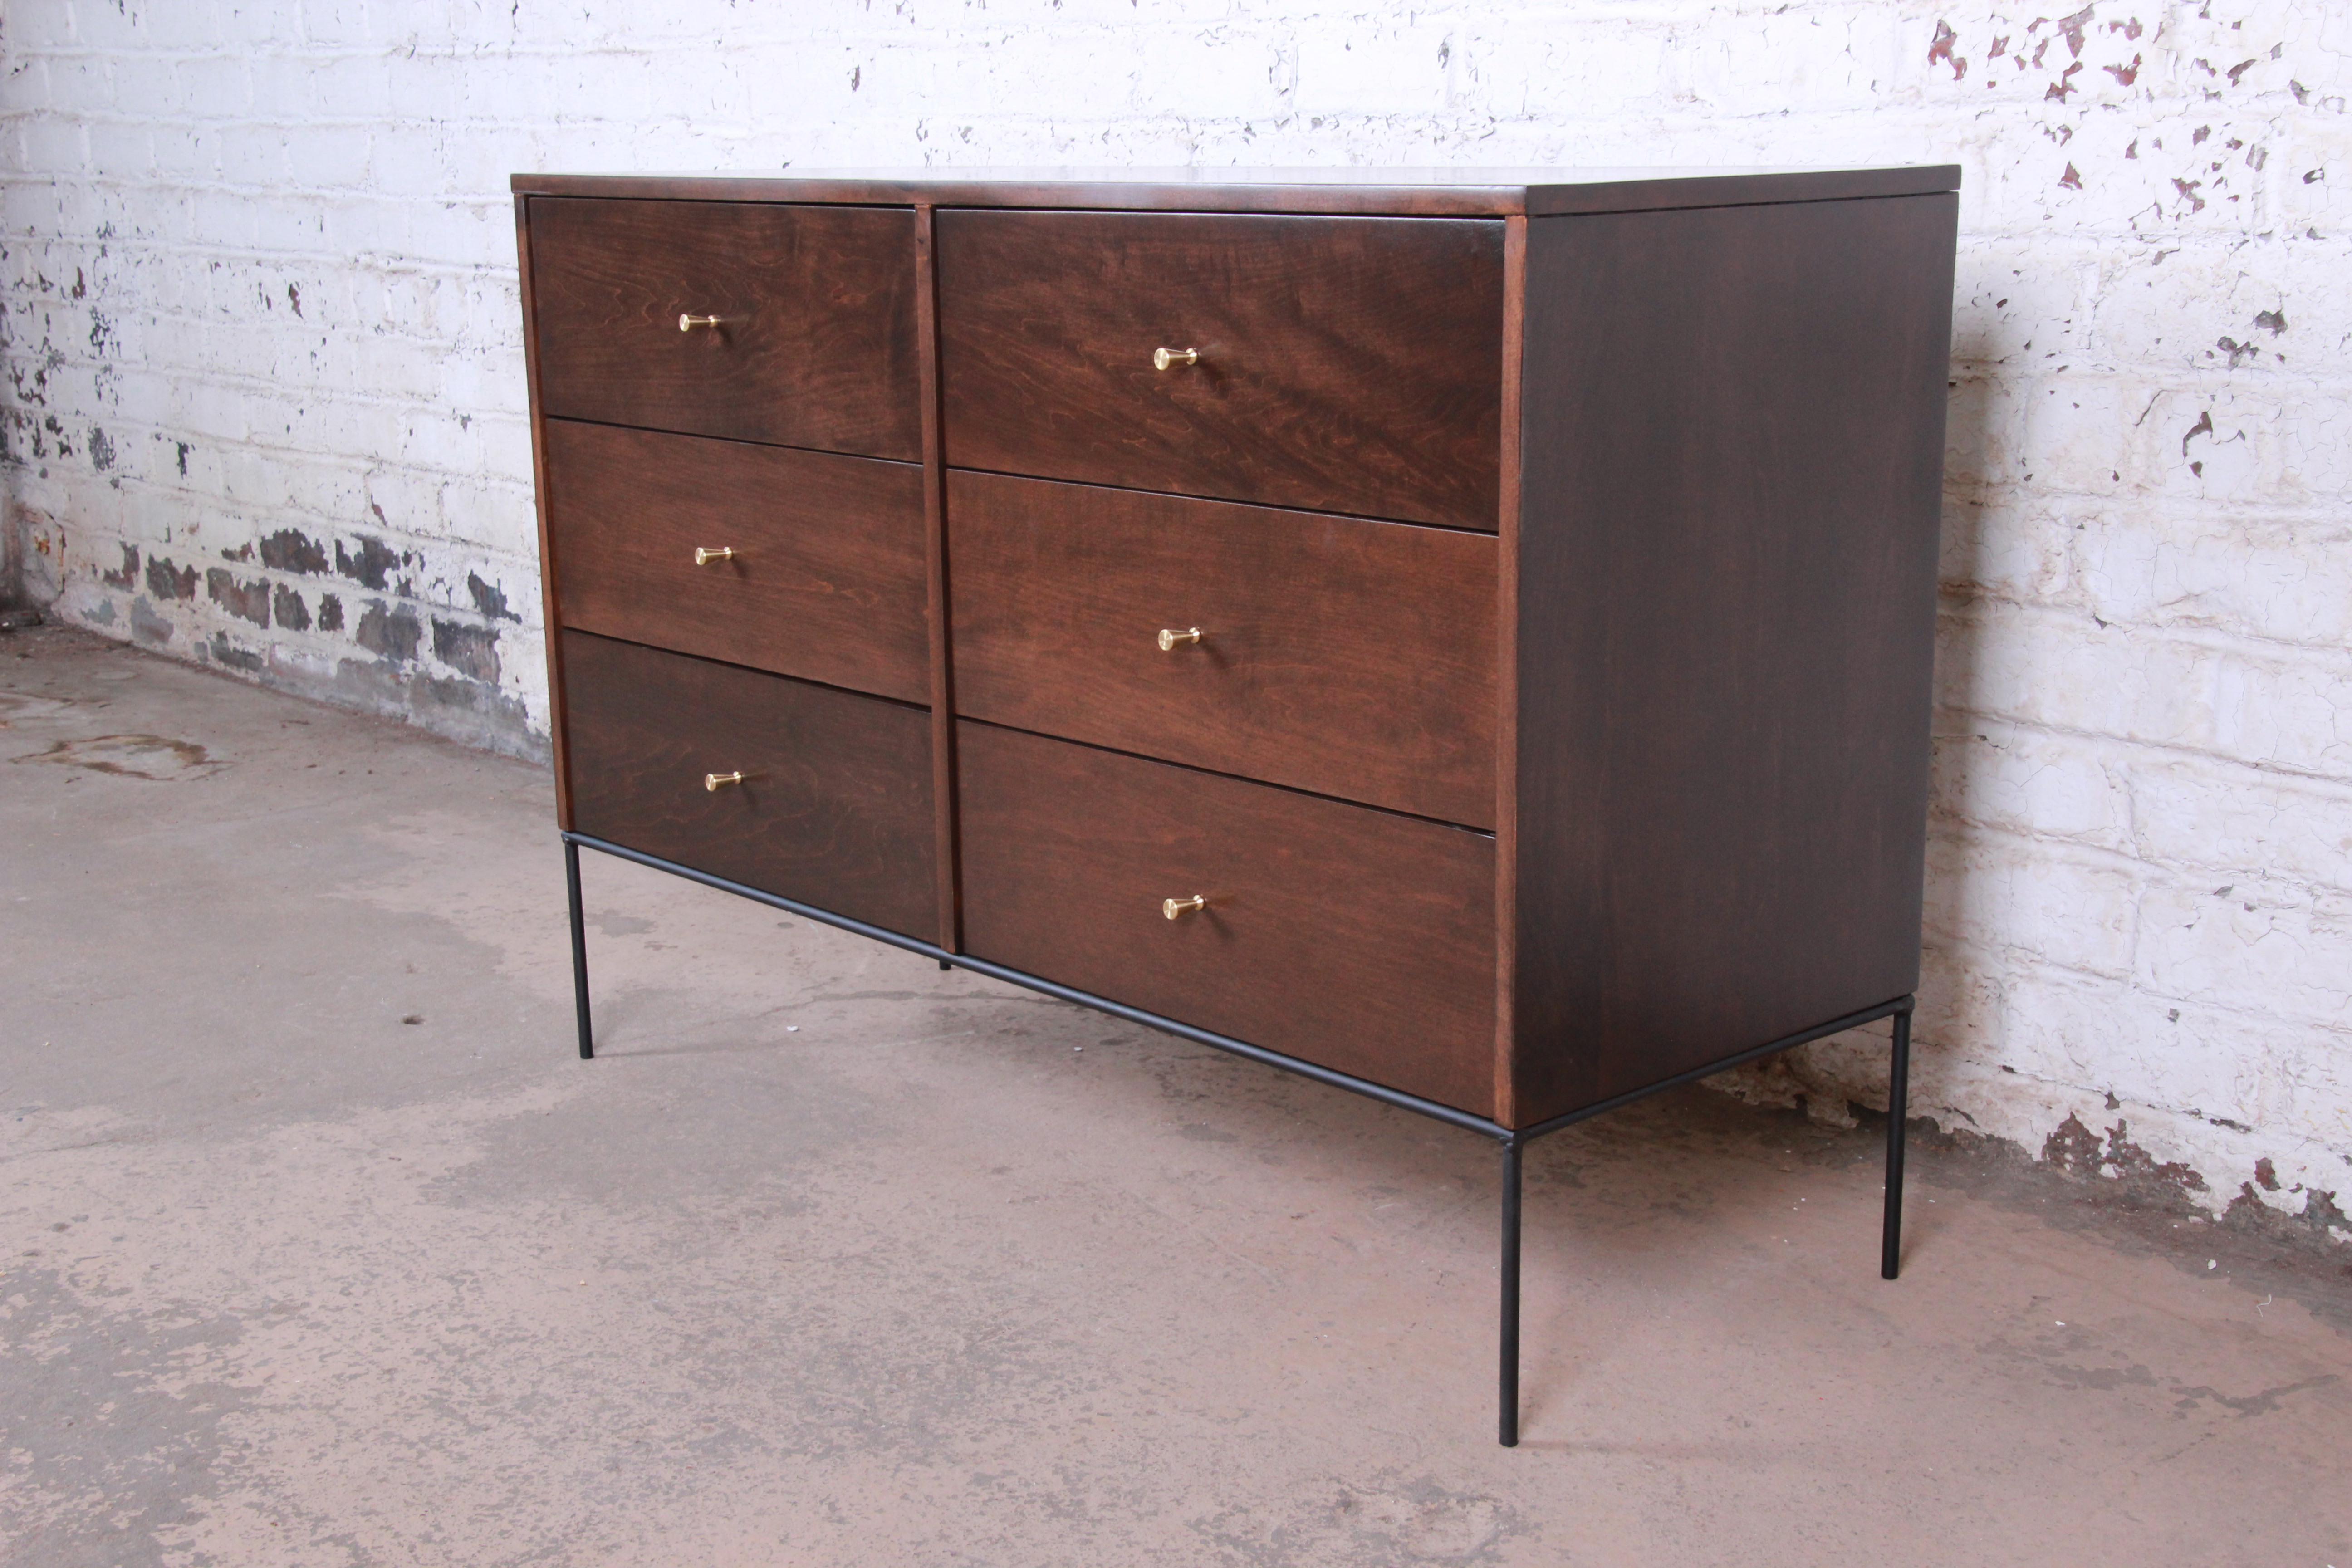 An exceptional Mid-Century Modern six-drawer dresser or credenza from the Planner Group line designed by Paul McCobb for Winchendon Furniture. The dresser features solid maple construction with stunning wood grain. It offers ample storage, with six